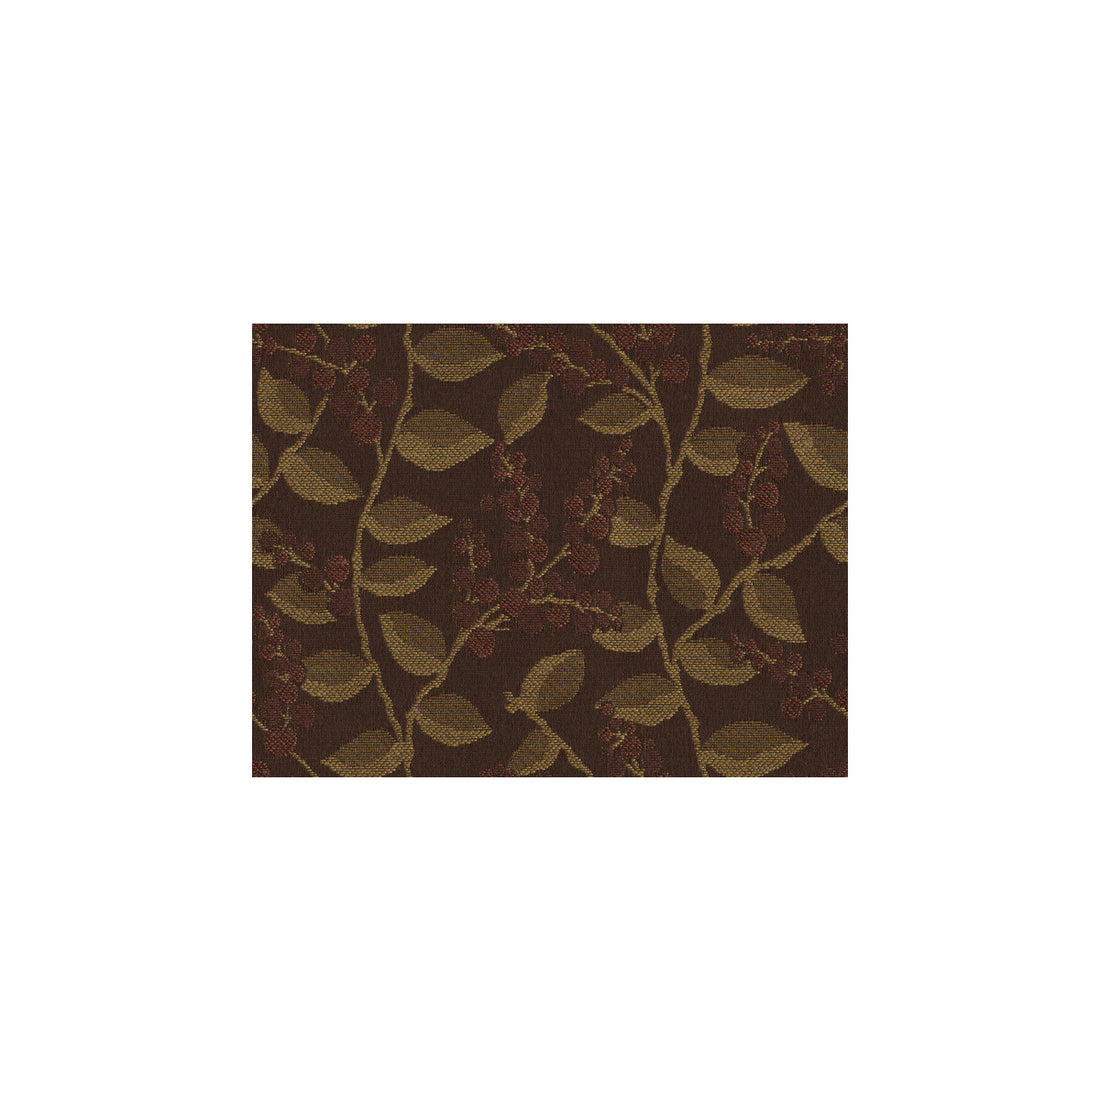 Vine Drive fabric in copper color - pattern 31527.624.0 - by Kravet Contract in the Contract Gis collection